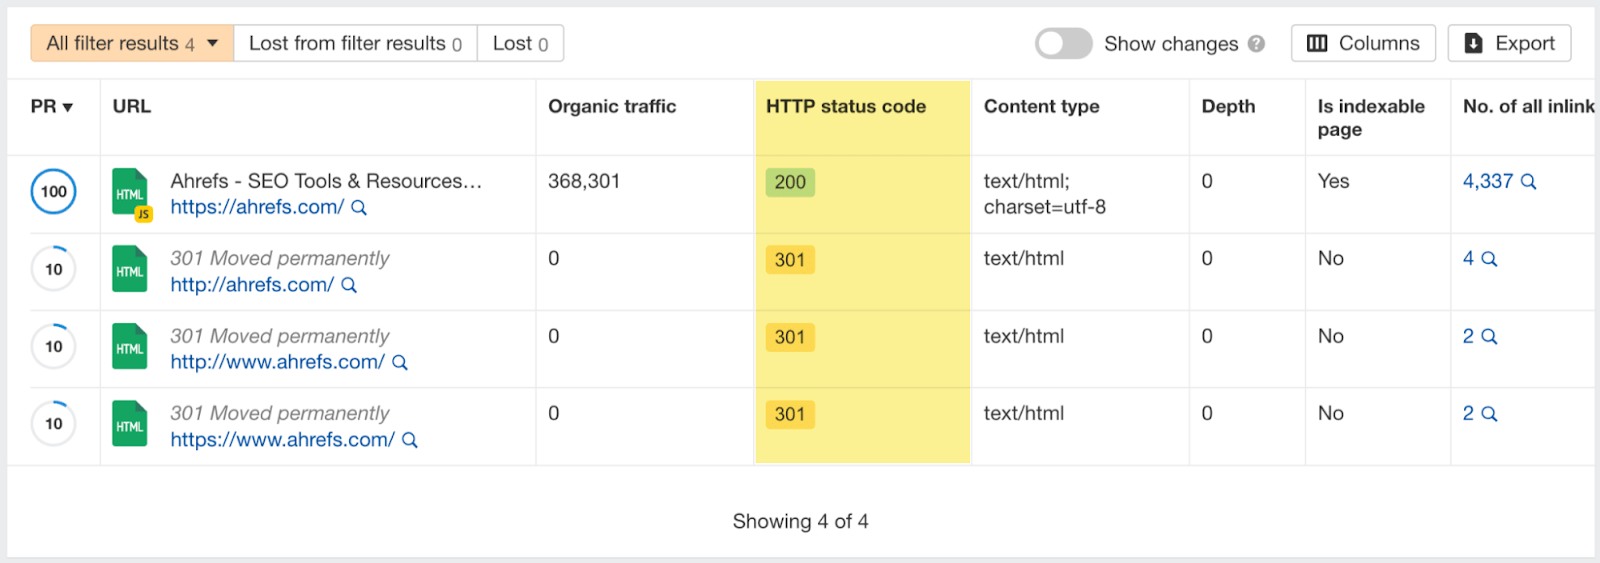 Table showing http status codes for a few URLs